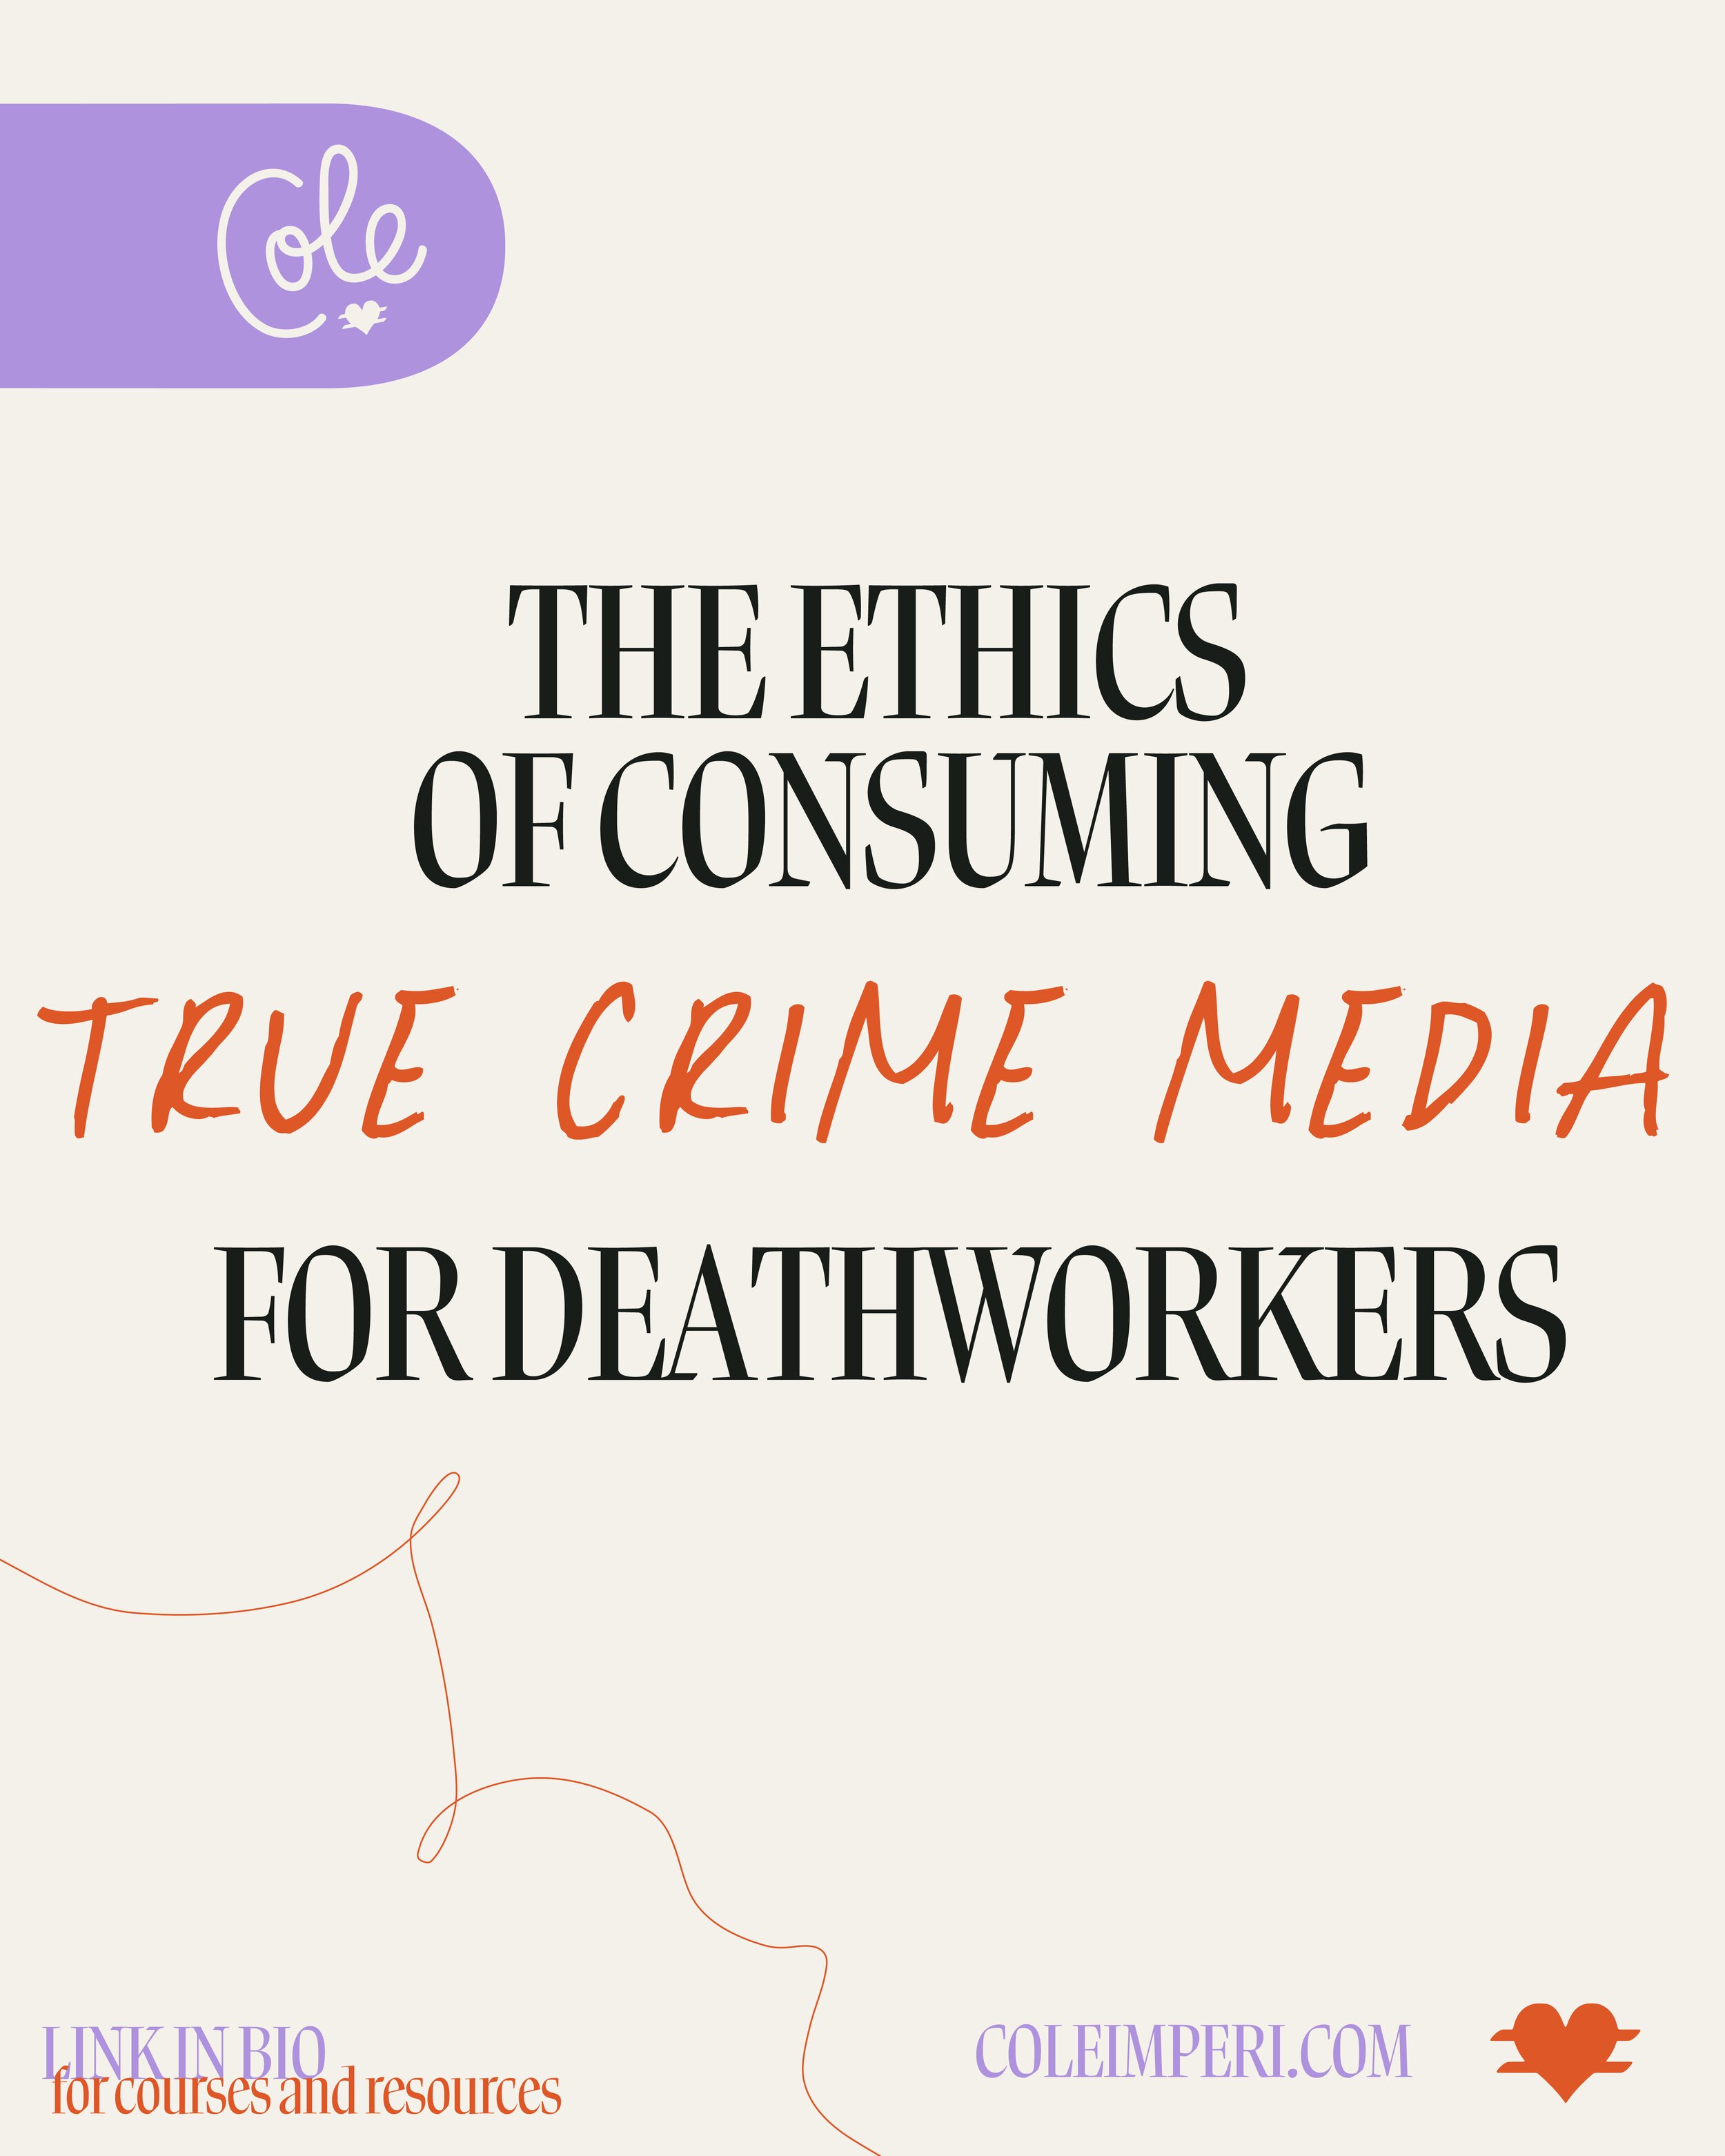 The Ethics of Consuming True Crime Media for Deathworkers Title